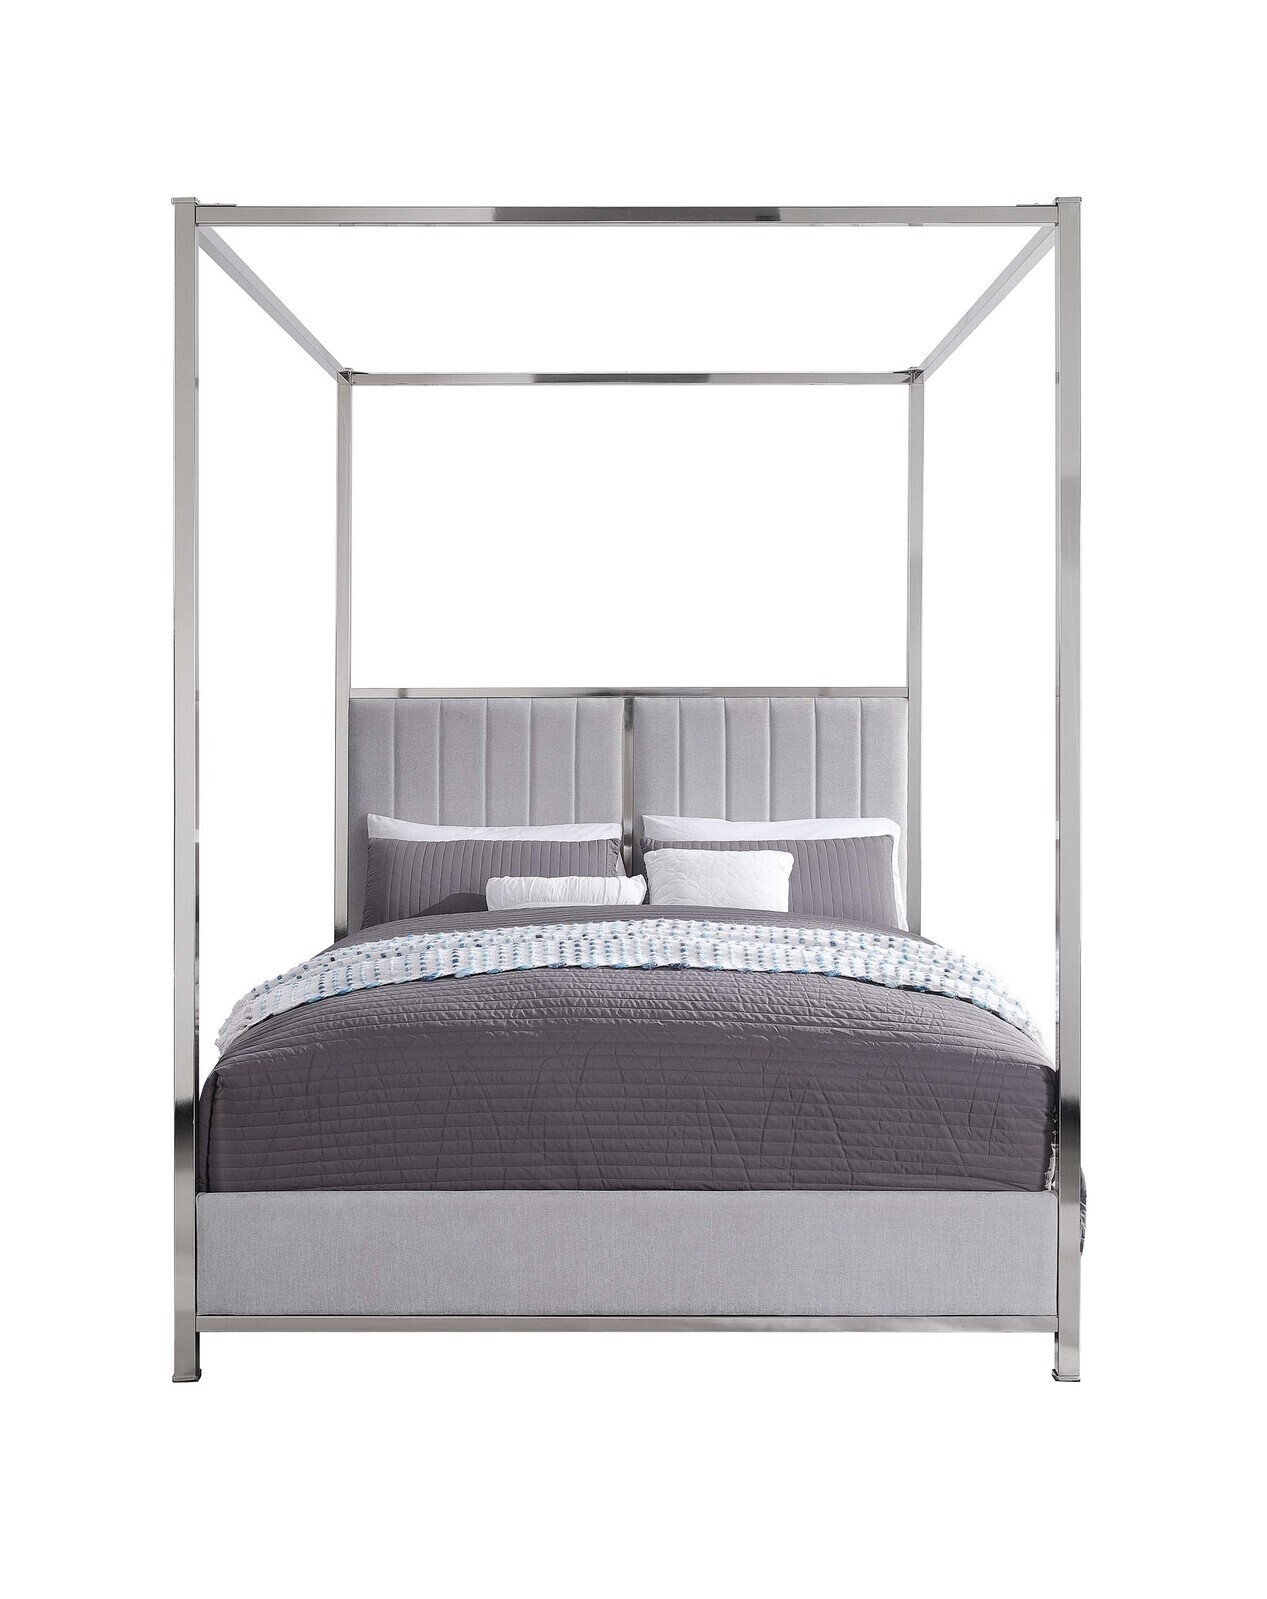 Kingston 4 Poster Upholstered Bed Chrome Plated Bed - Queen Bed